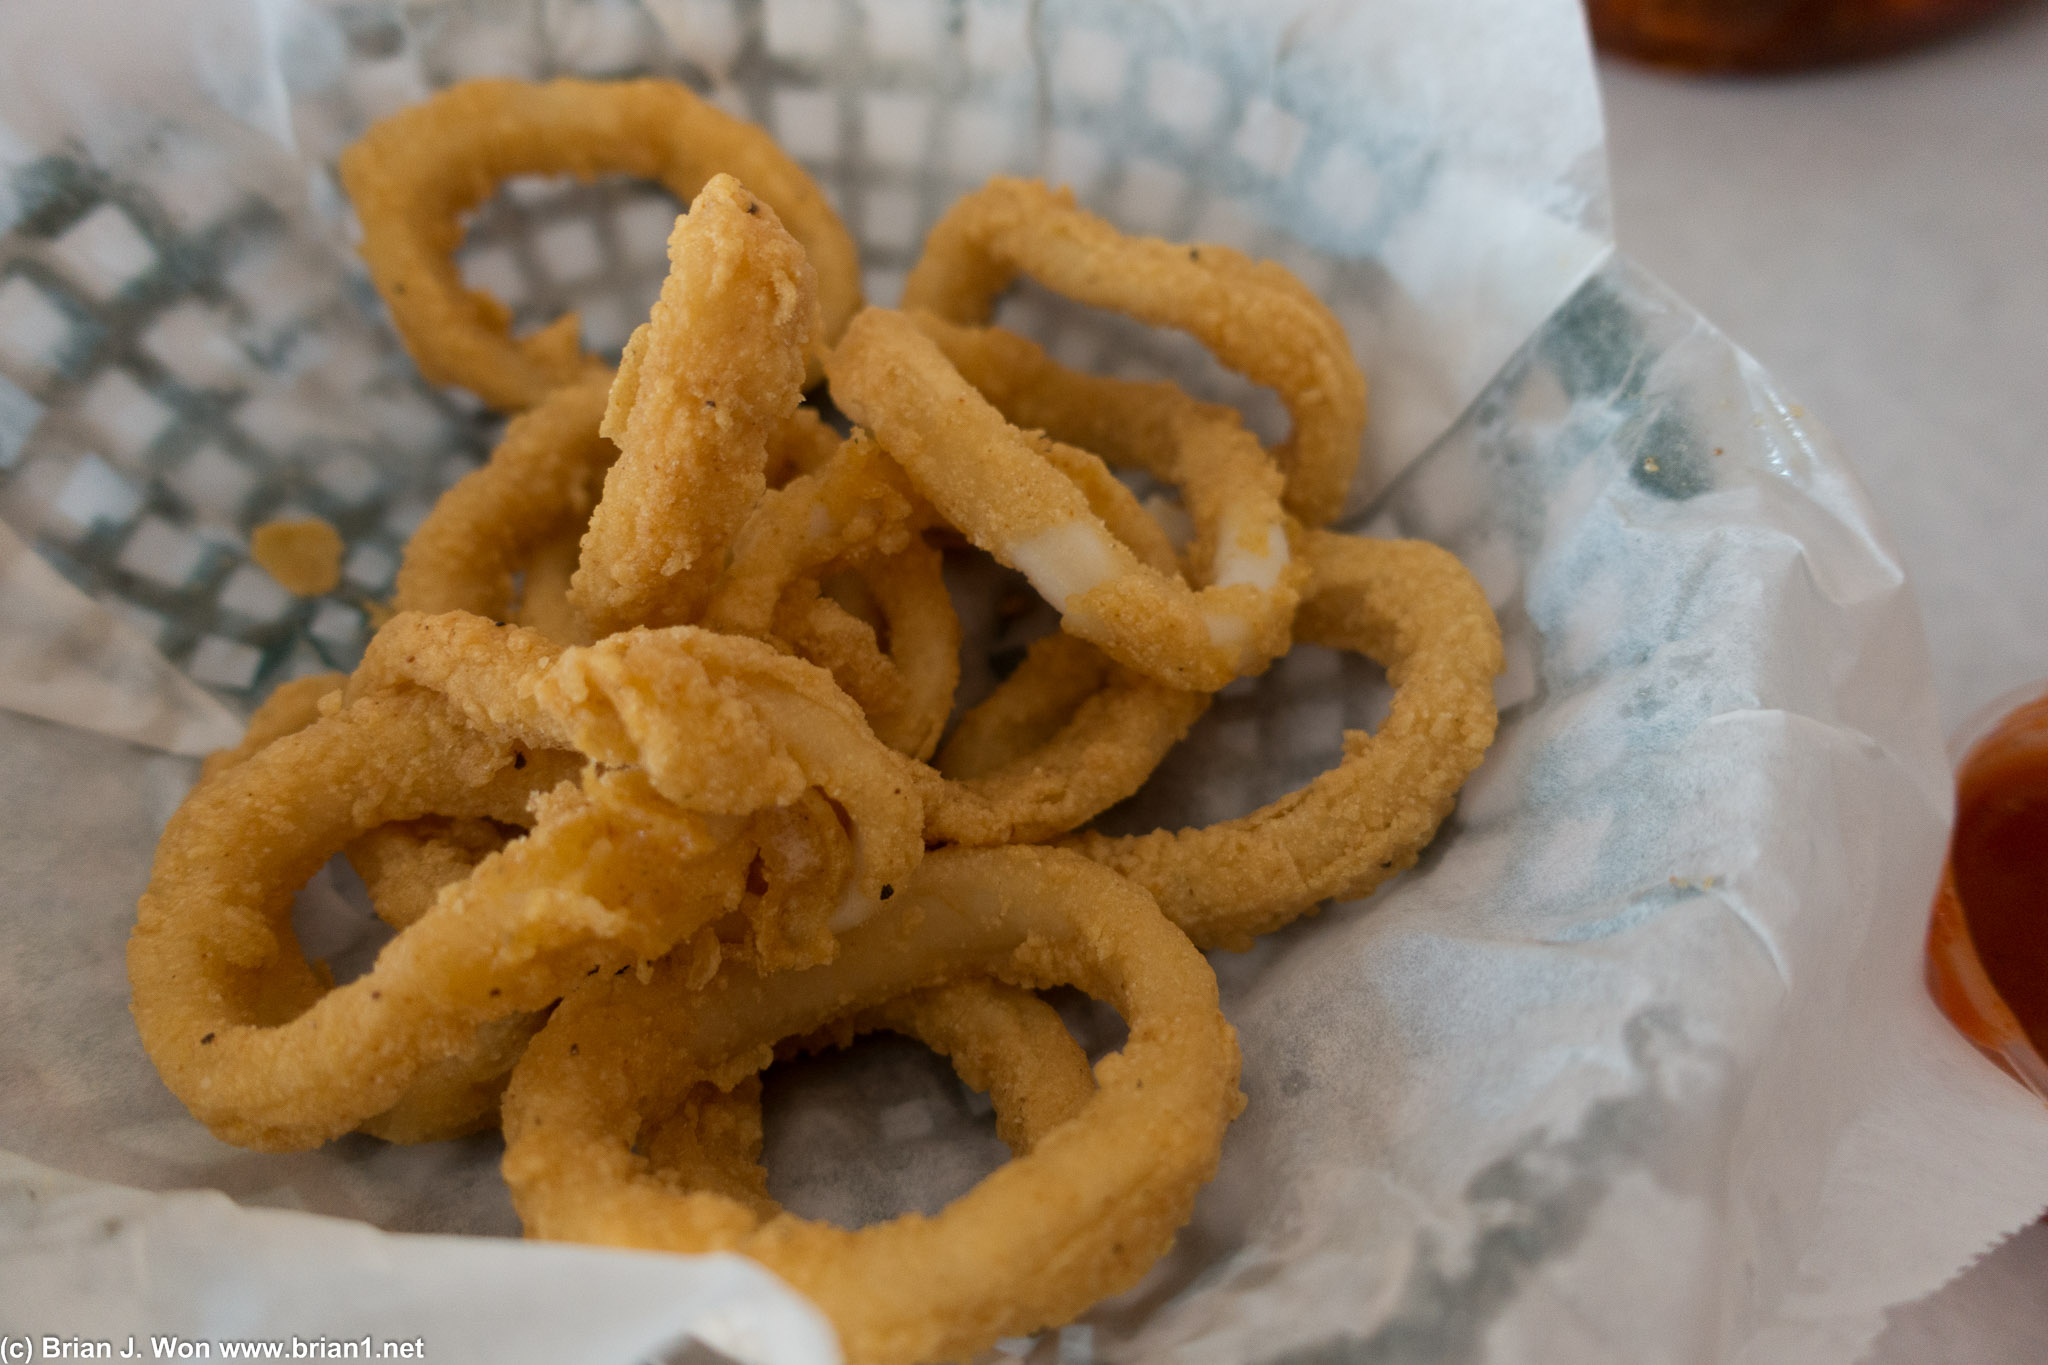 Calamari rings. Nom. A little more crude here than the tiny little ones that Palamino or nicer places serve.